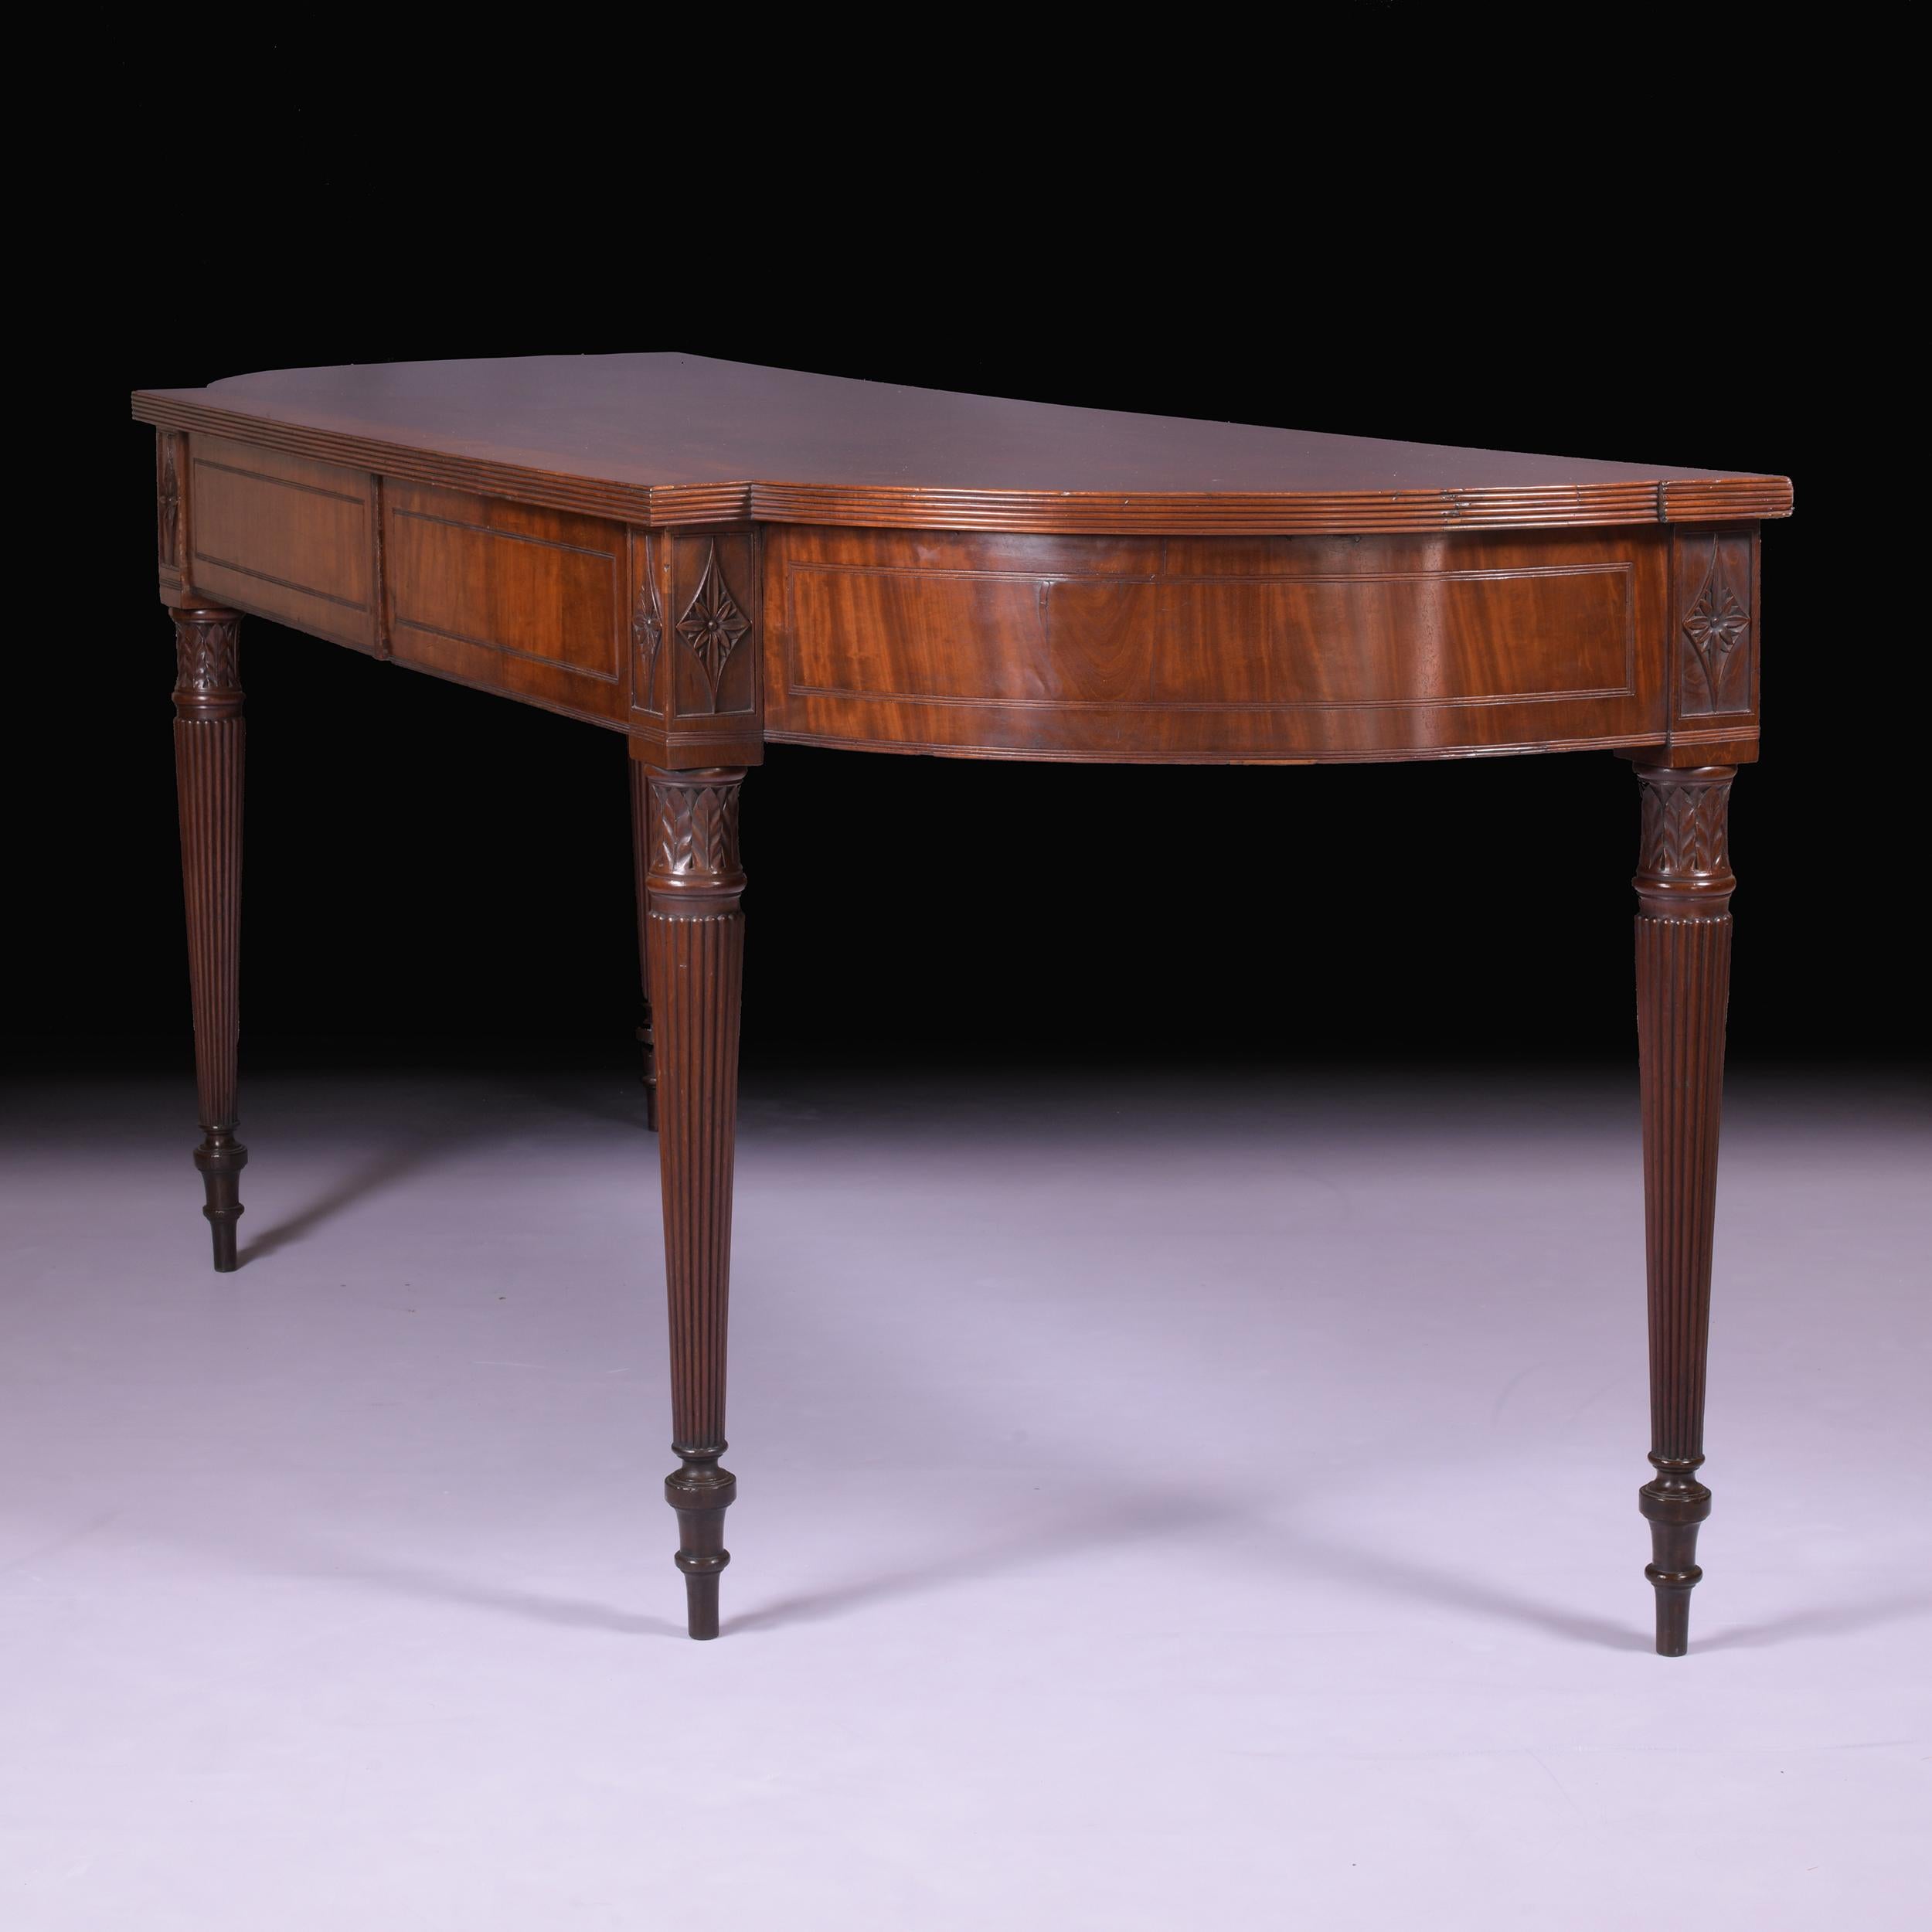 Mahogany 19th Century English Regency Serving / Console Table Attributed to Gillows